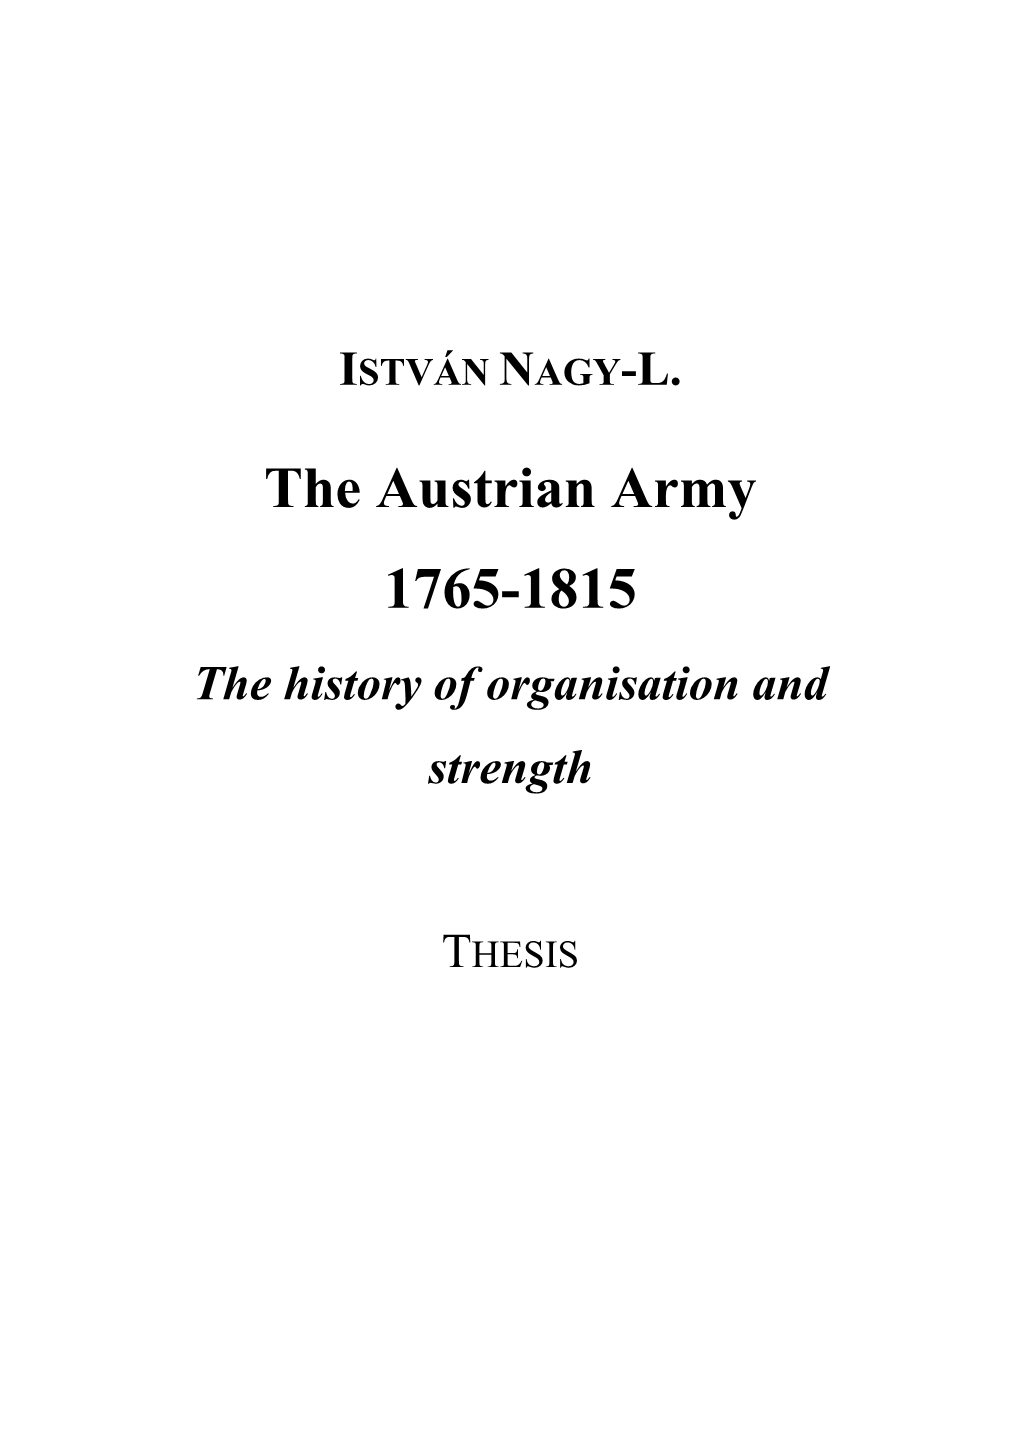 The Austrian Army 1765-1815 the History of Organisation and Strength